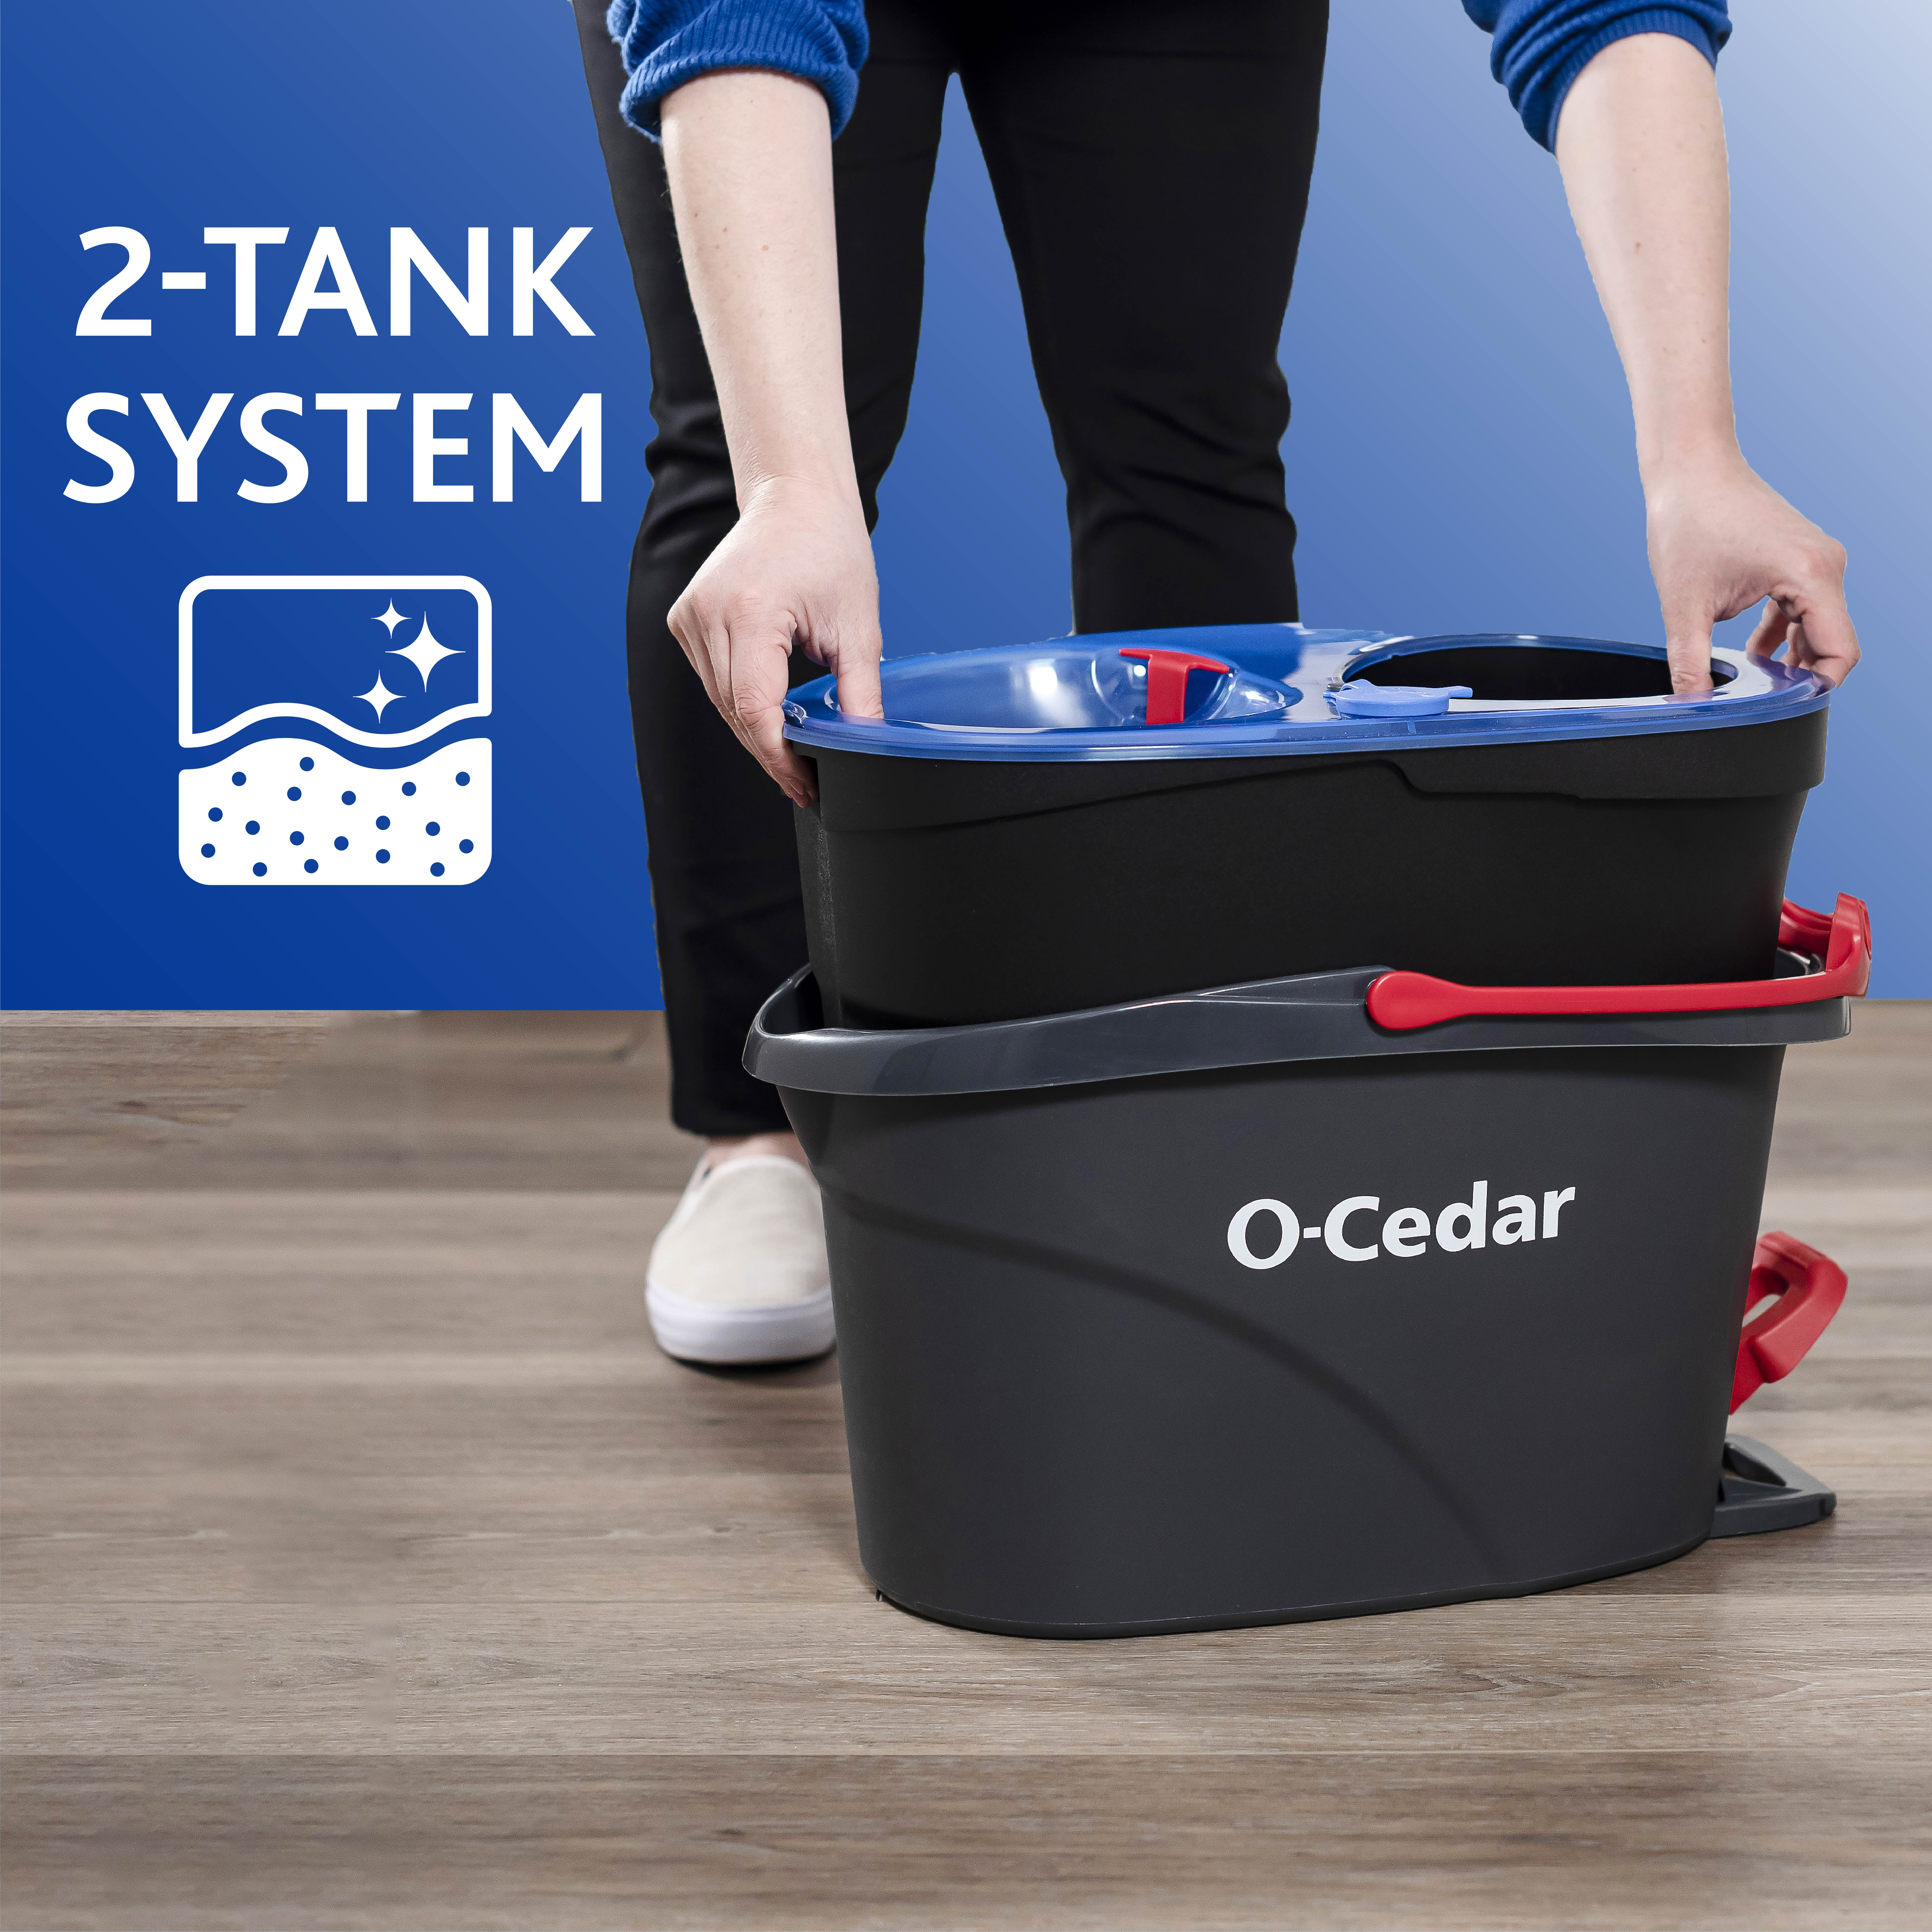 O-Cedar EasyWring RinseClean Spin Mop and Bucket System, Hands-Free System - image 7 of 25